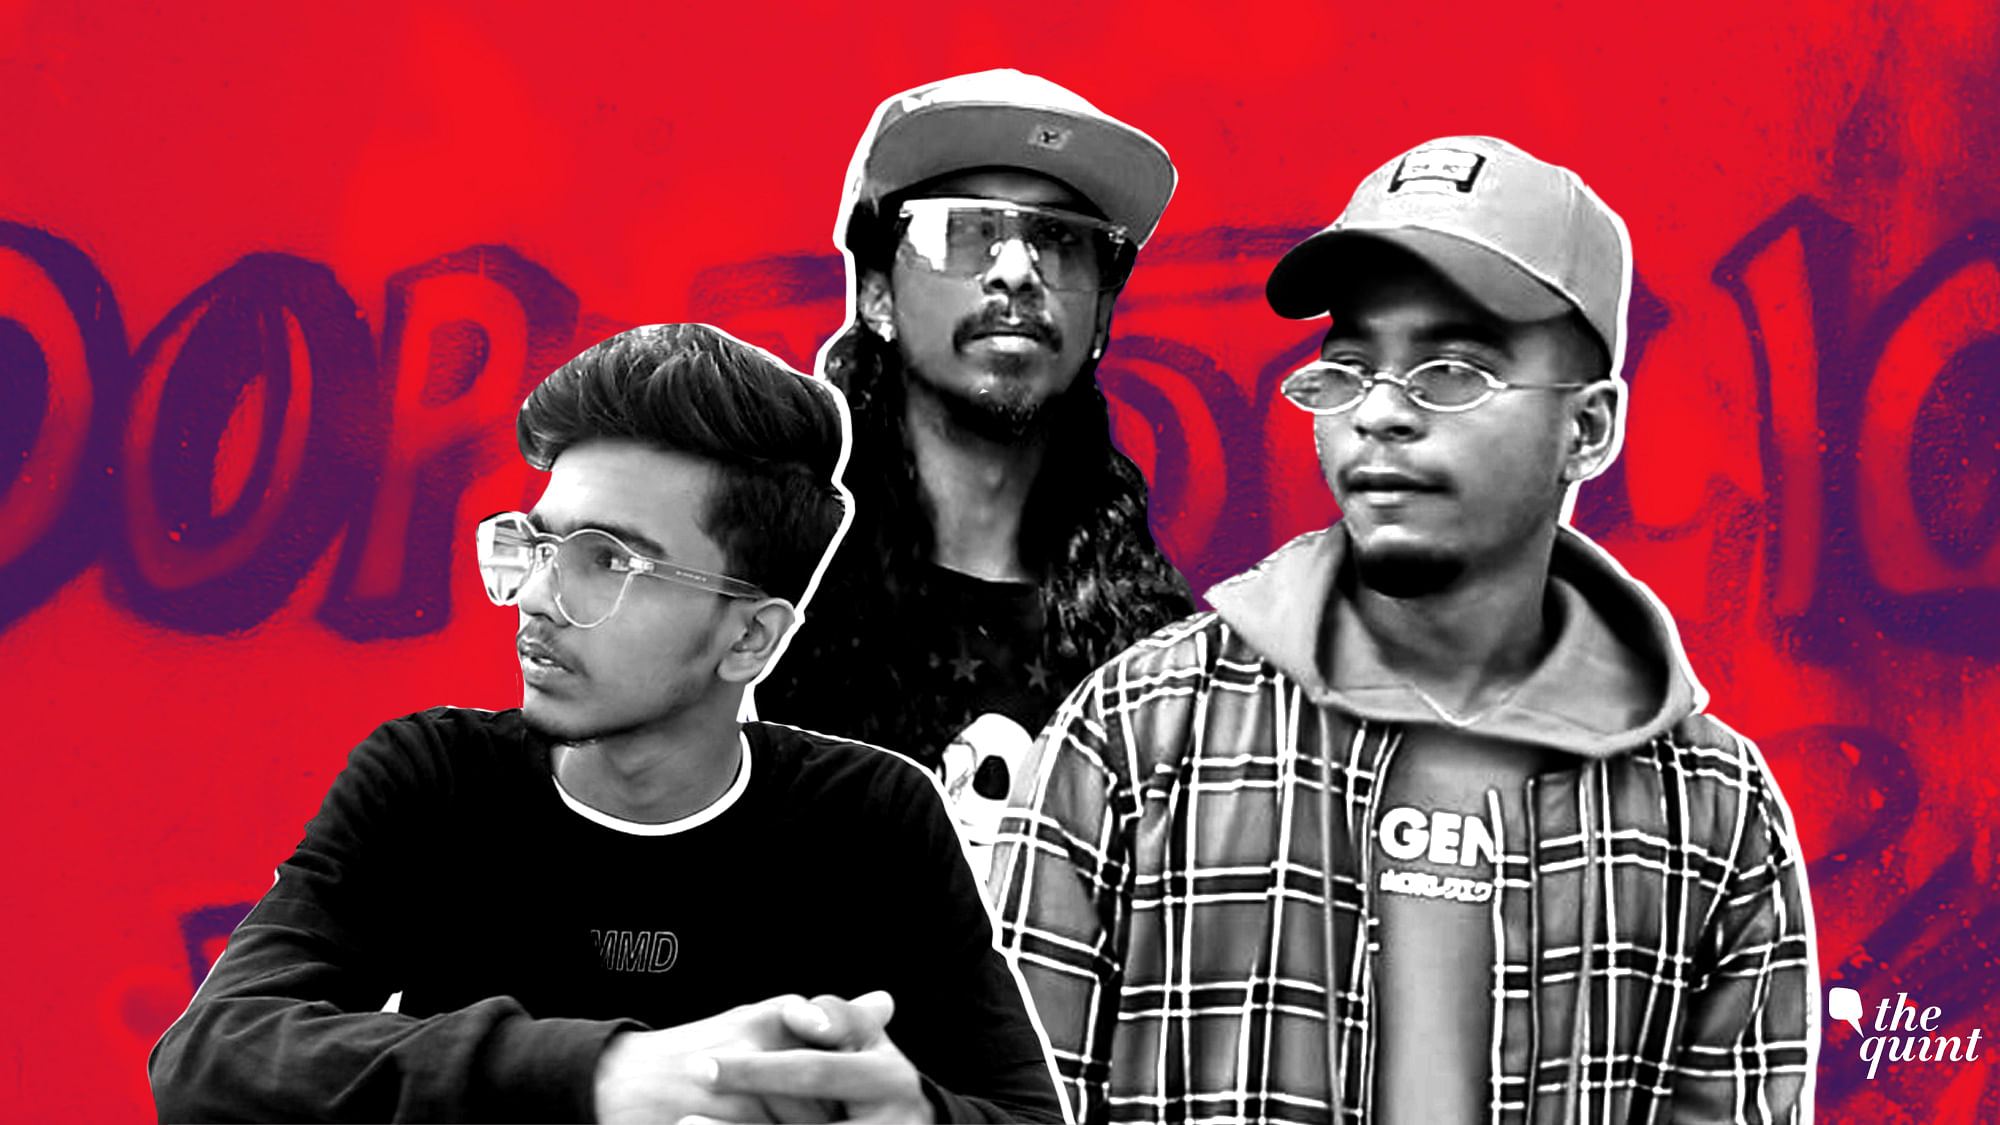 Find out about Mumbai’s street rappers and their lives.